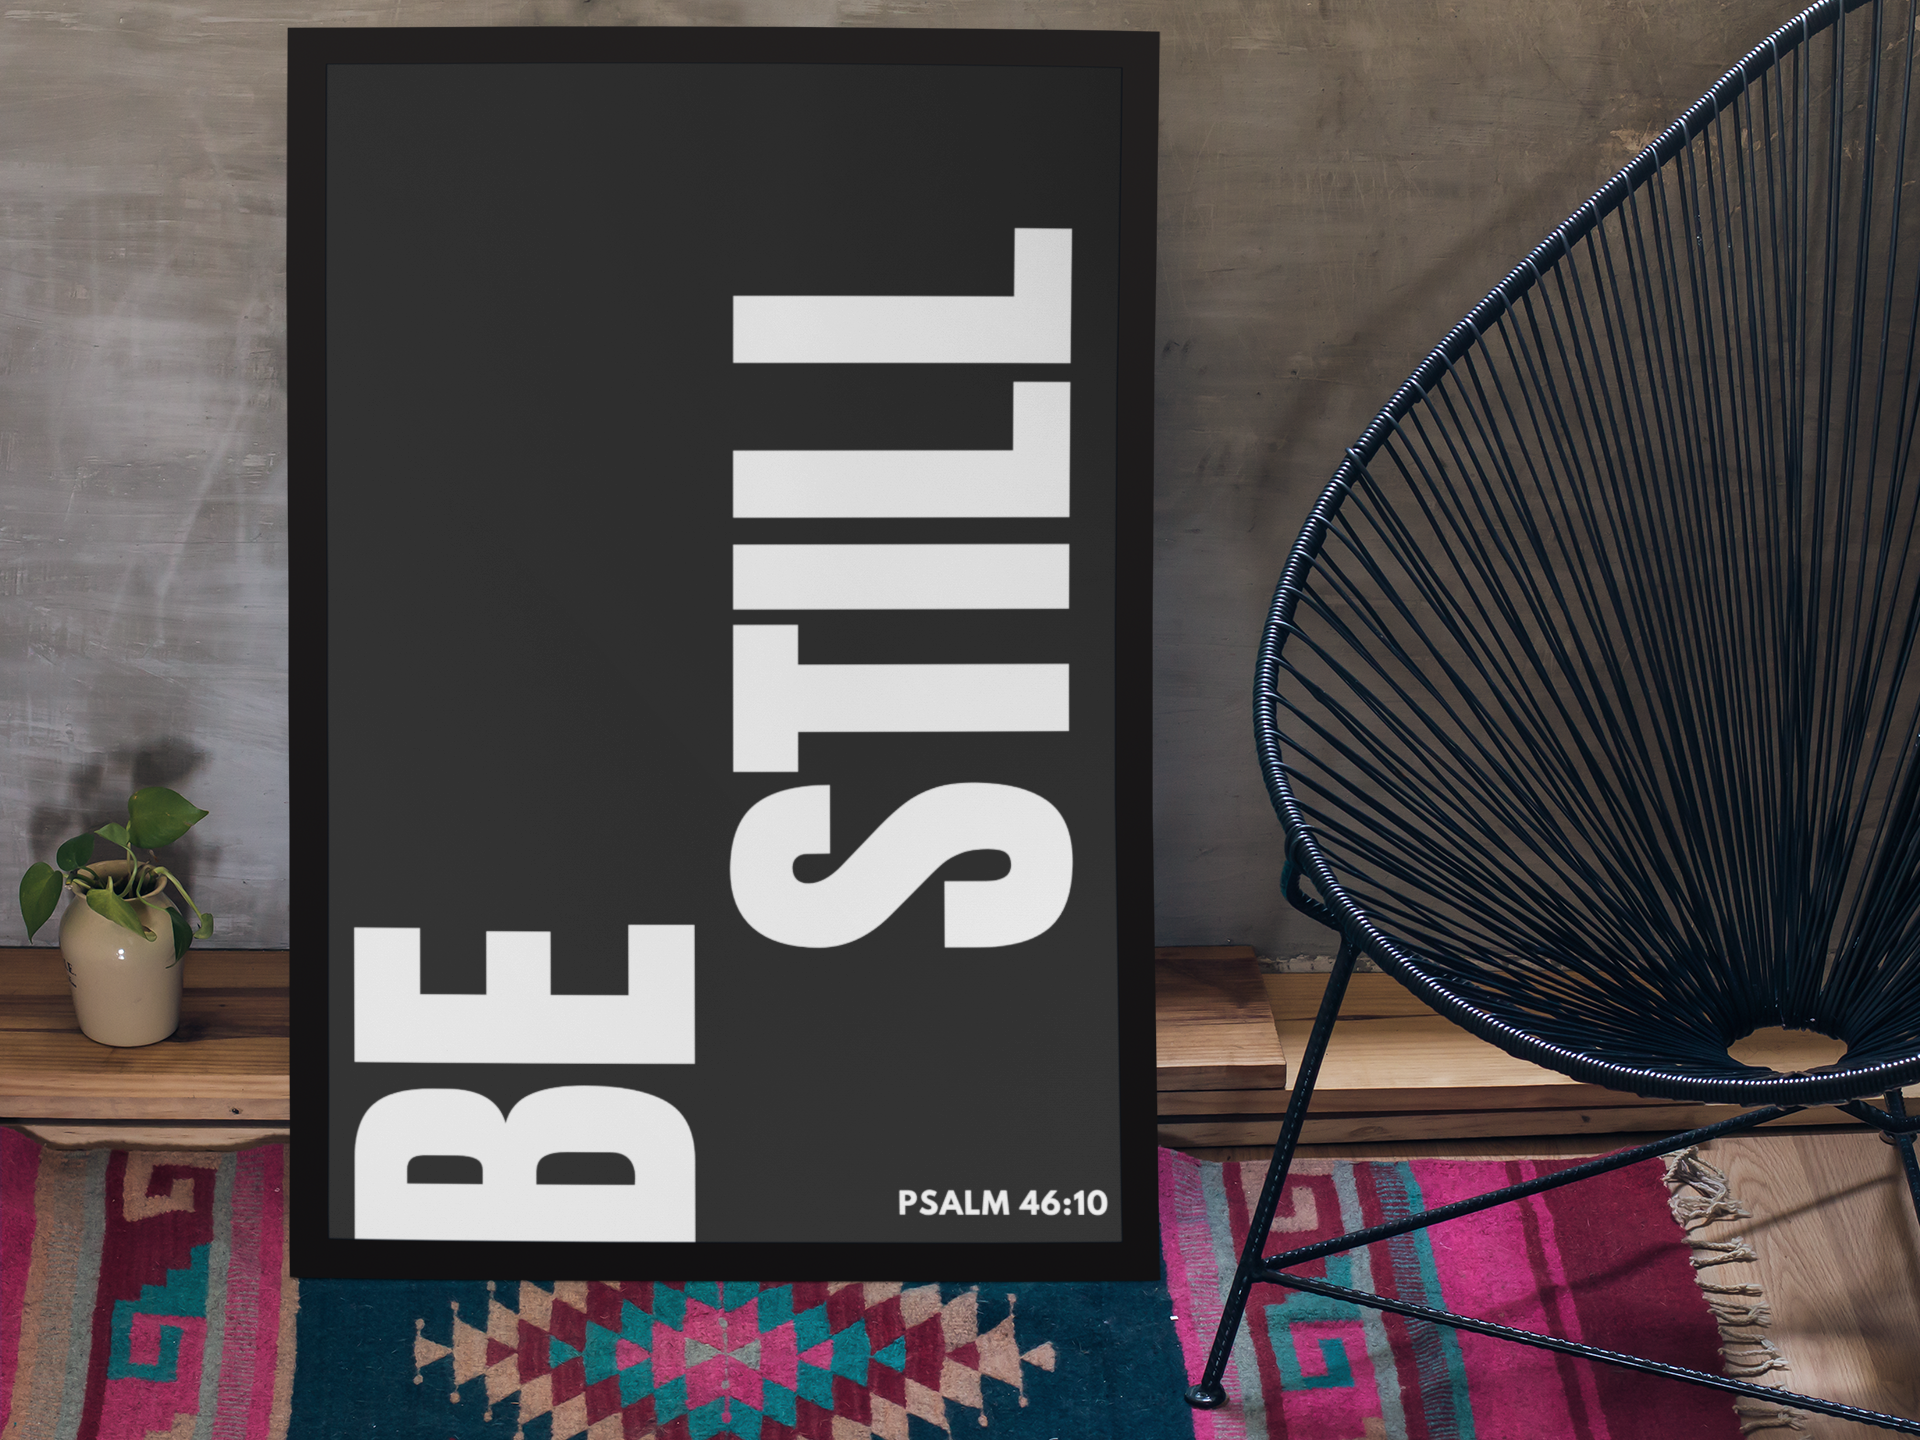 Art print that reads "Be still" this is based on the scripture from Psalm 46:10 